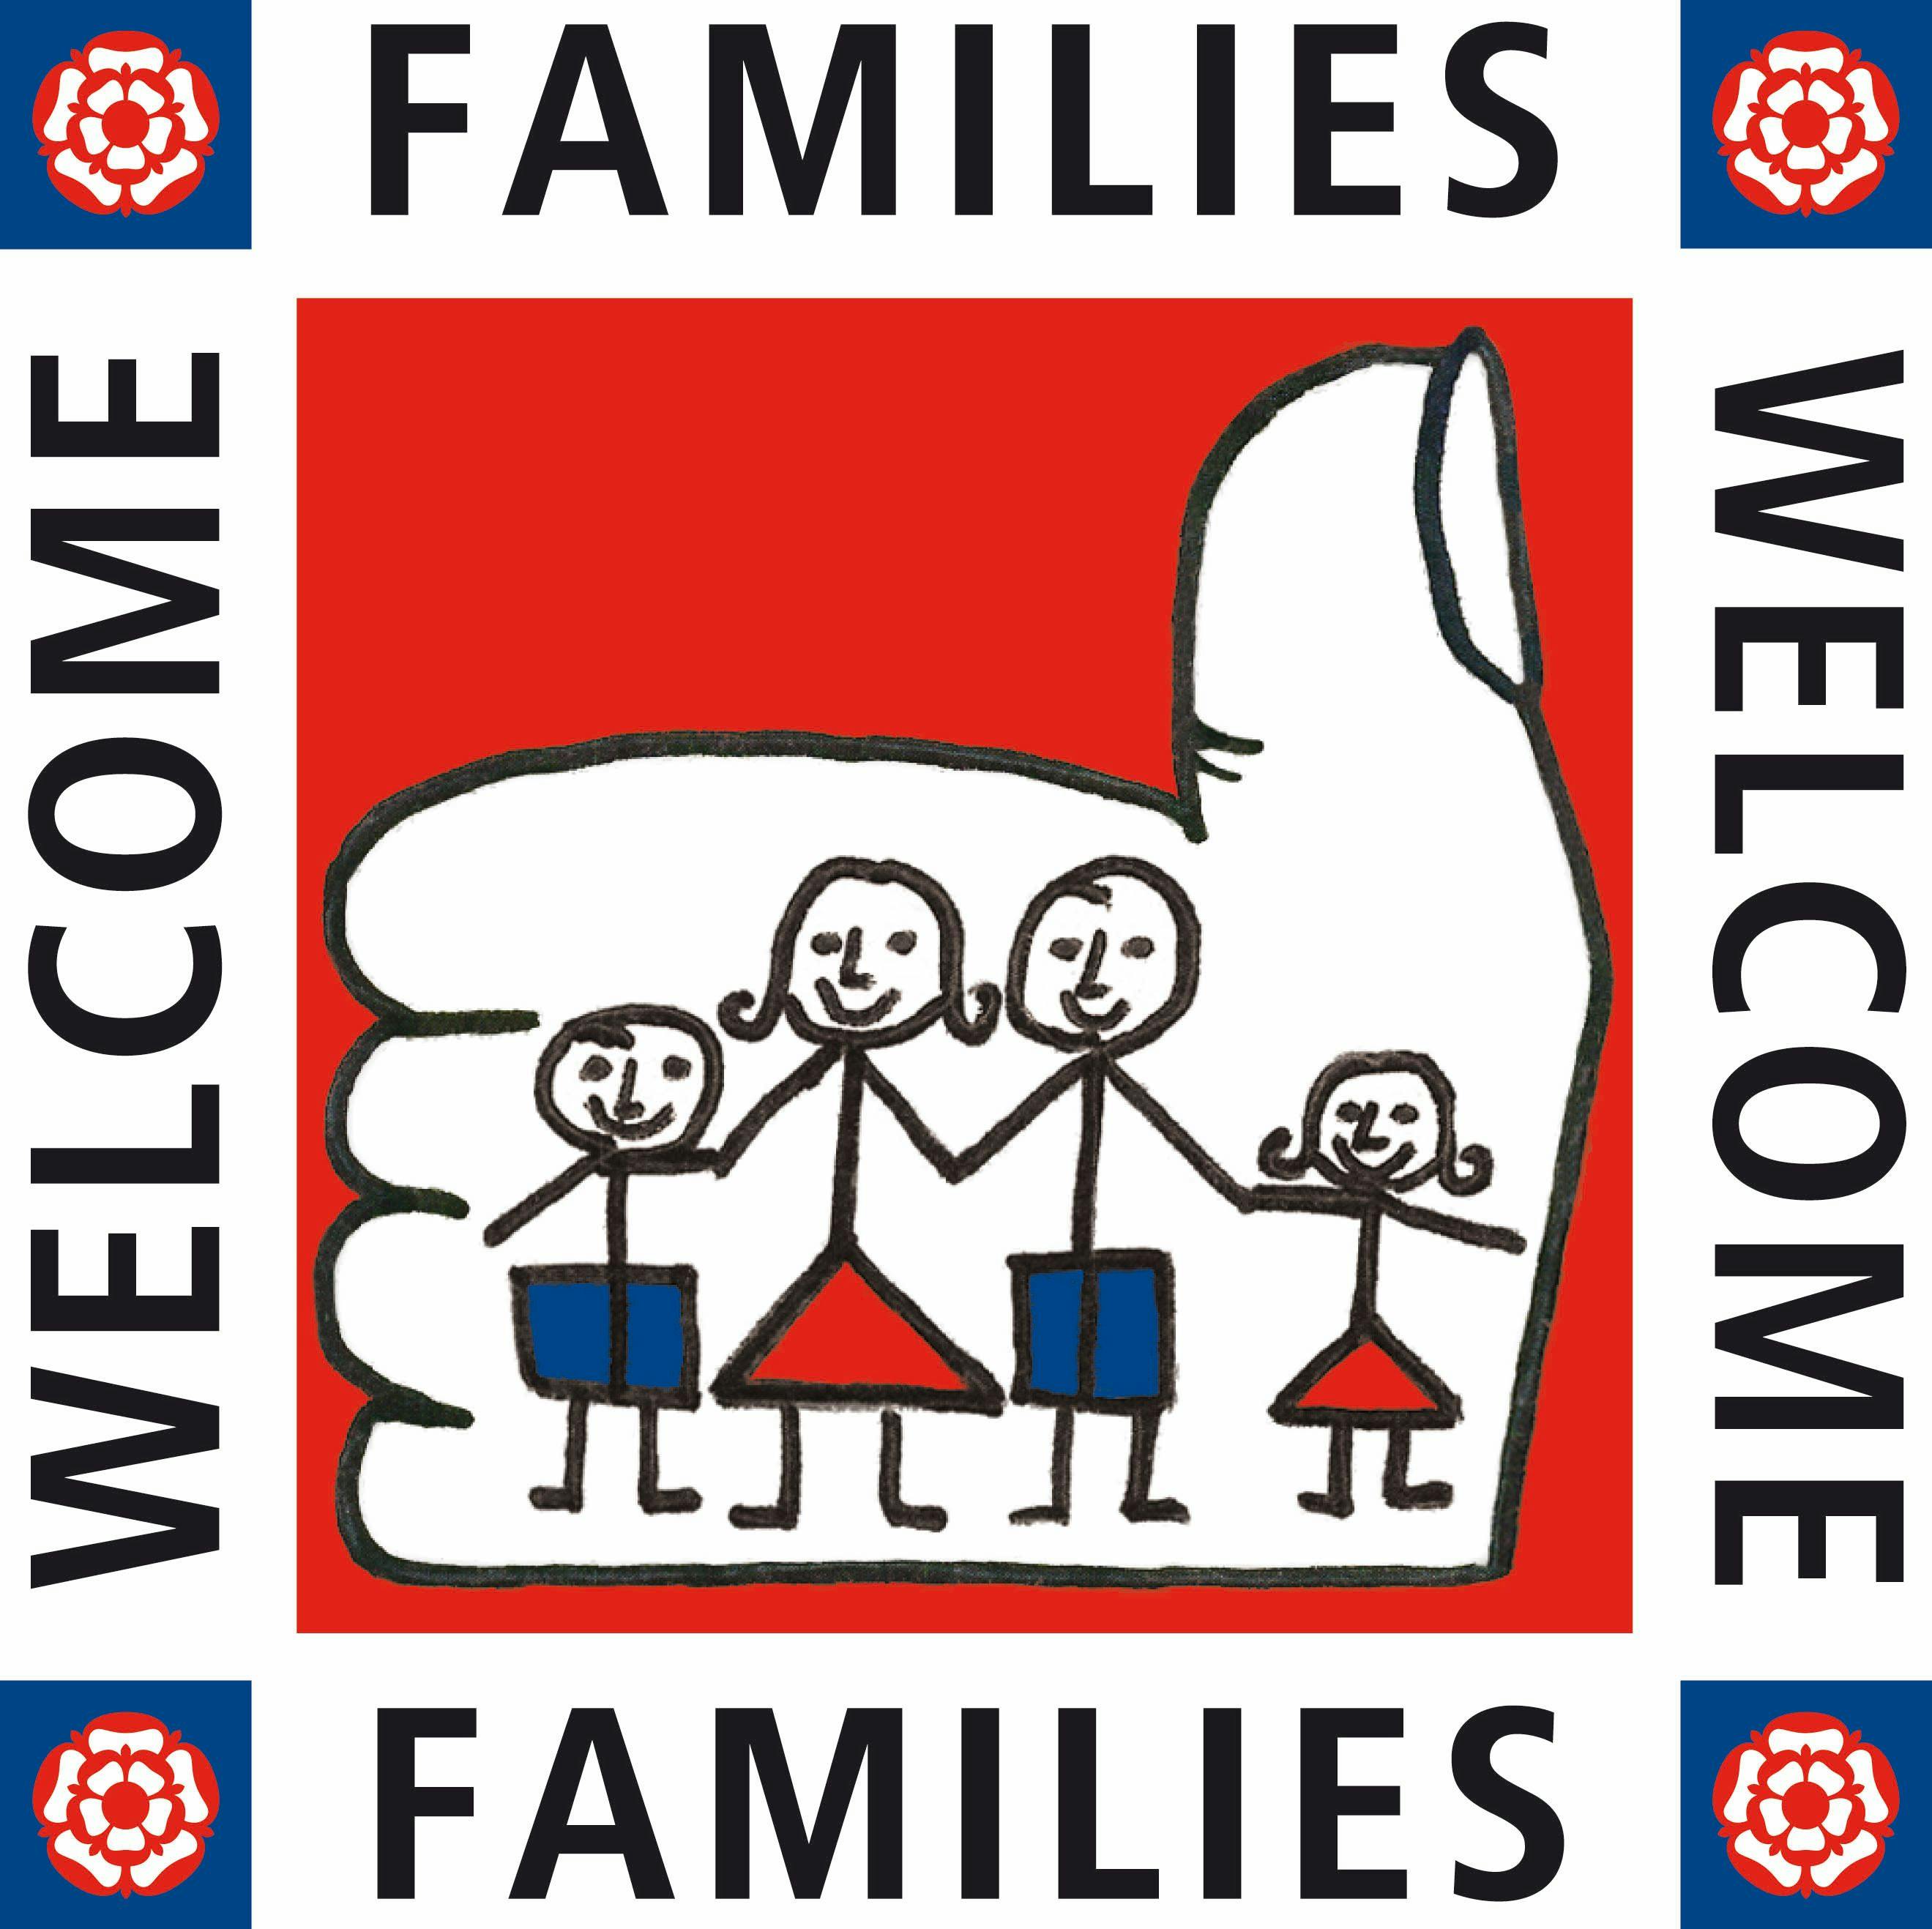 Enjoy England / Visit Britain - Welcome Families